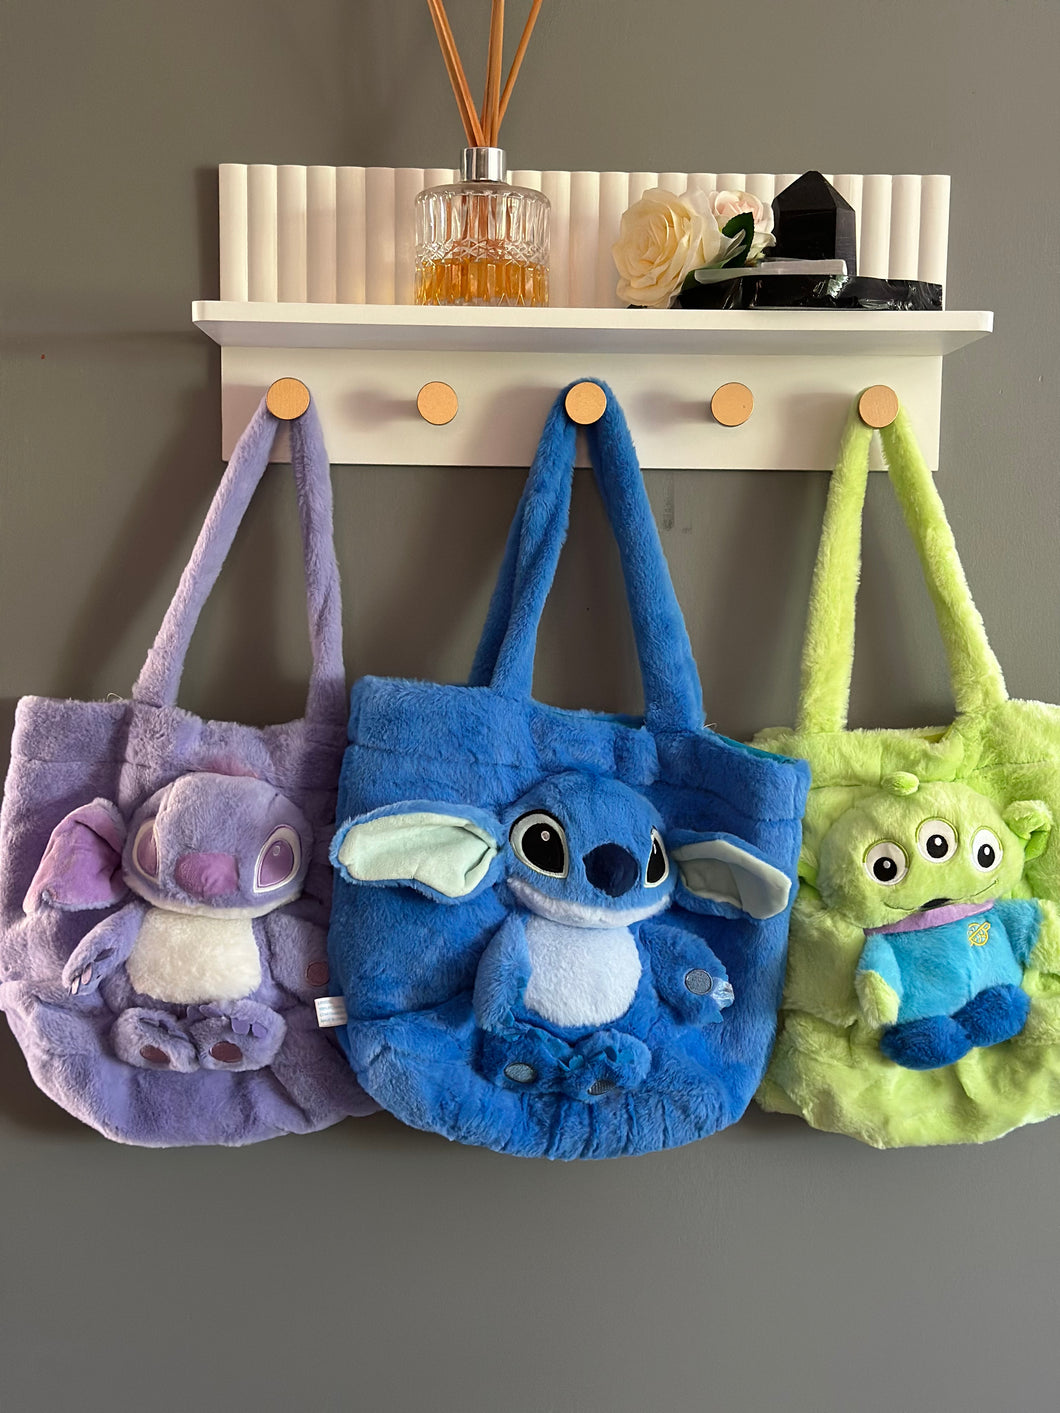 Fluffy plush character bags